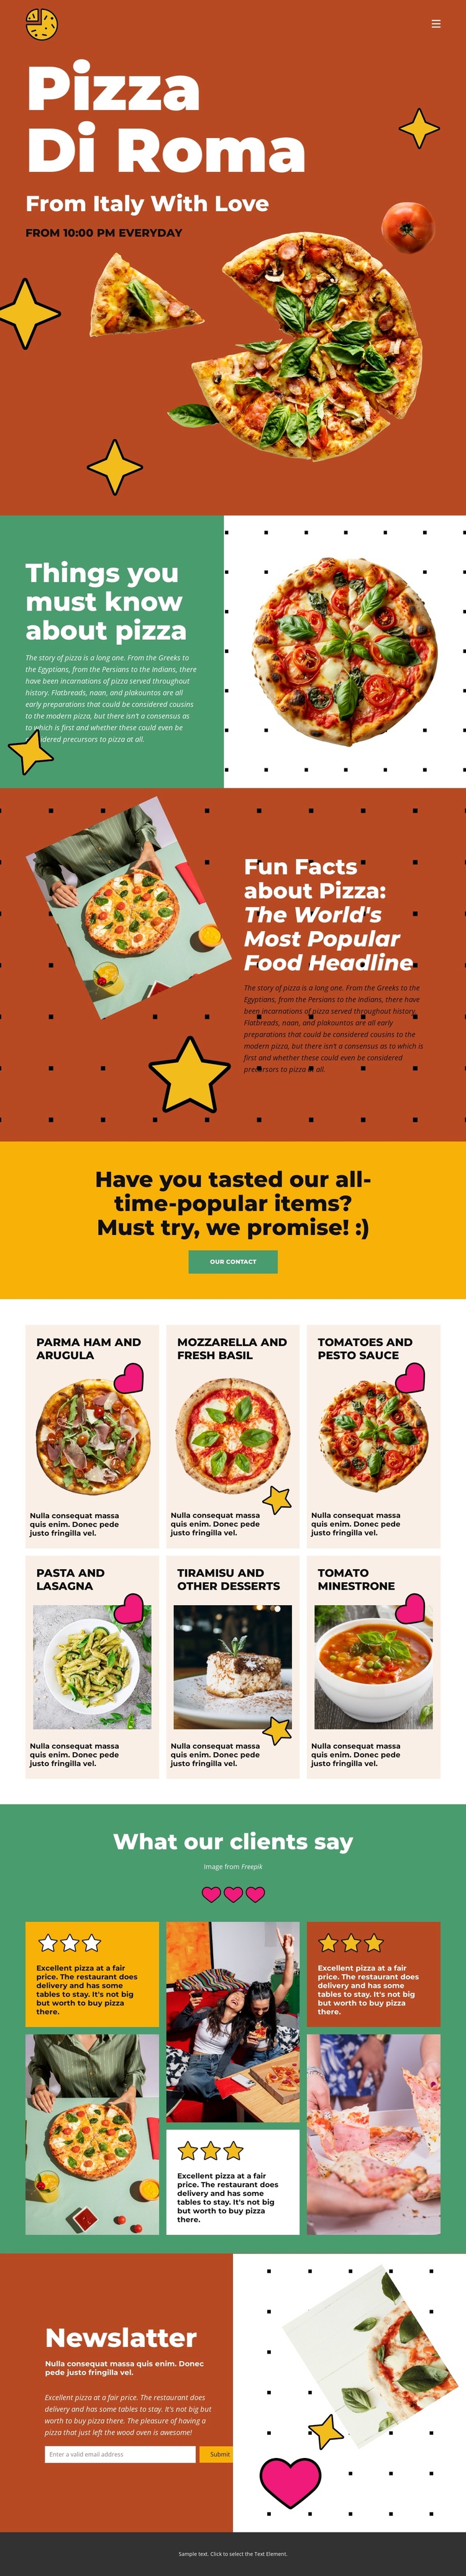 Things you must know about pizza Website Builder Software